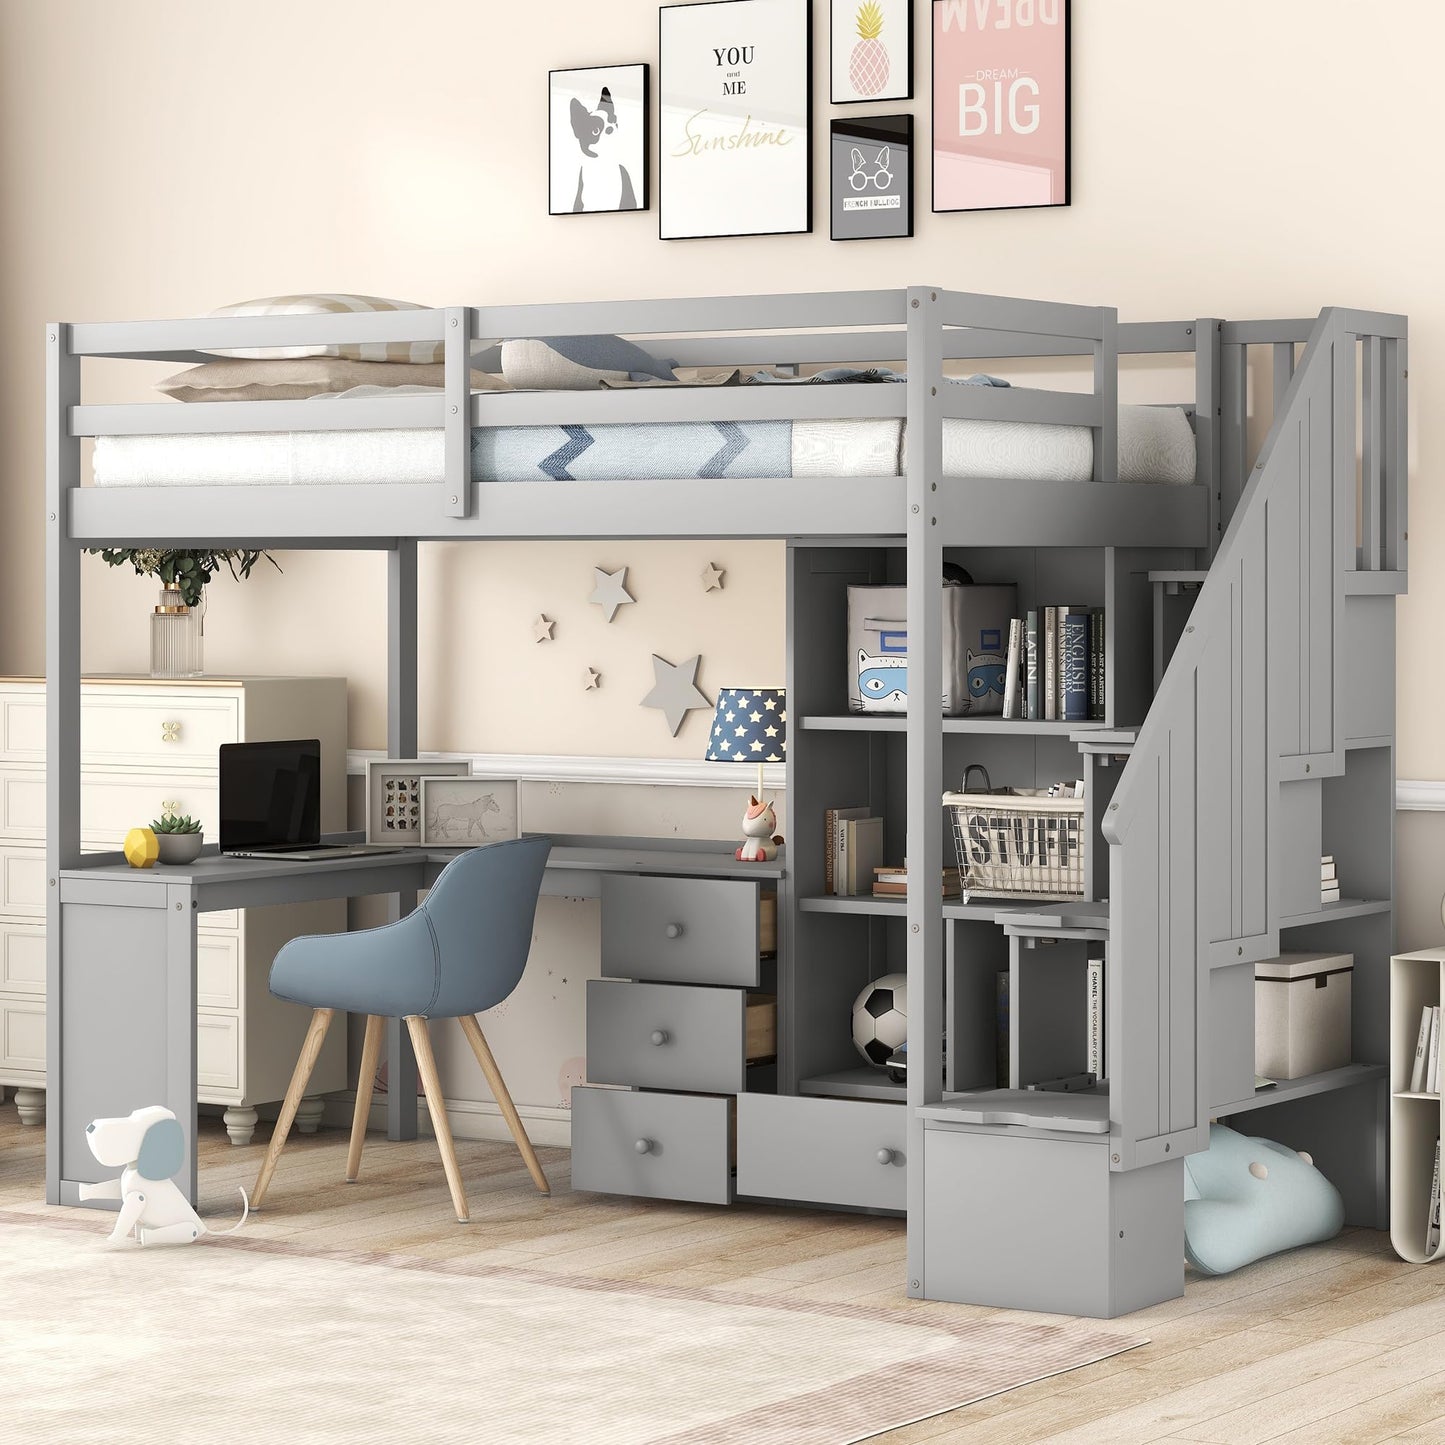 SOFTSEA Twin Size Loft Bed with Desk and Stairs, Solid Wood Loft Bed with Storage Staircase, Multi-Function Loft Bed with Storage Drawers and